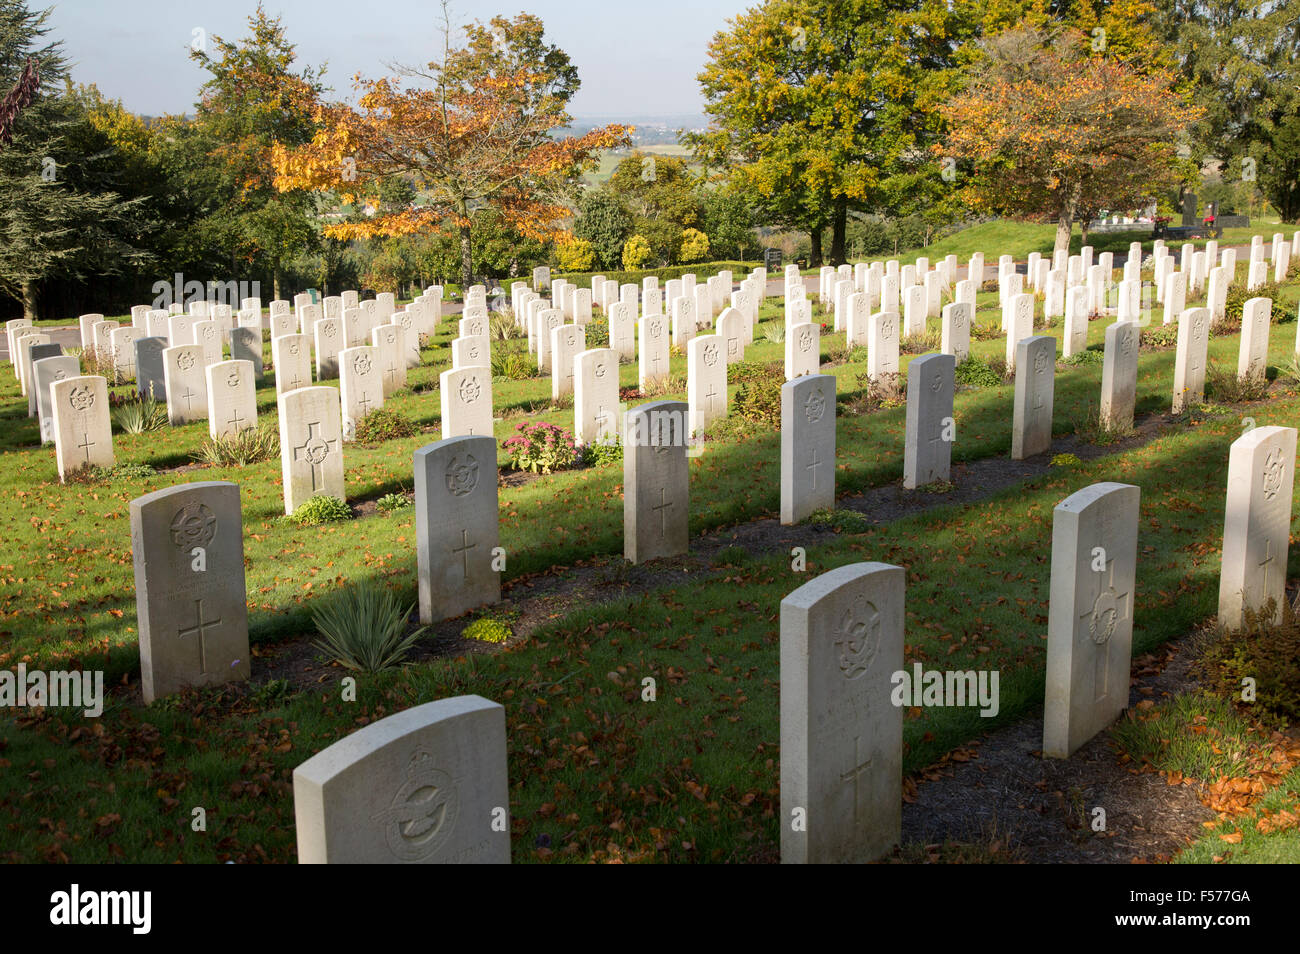 Graves from second world war at Haycombe cemetery, Bath, Somerset, England, UK Stock Photo